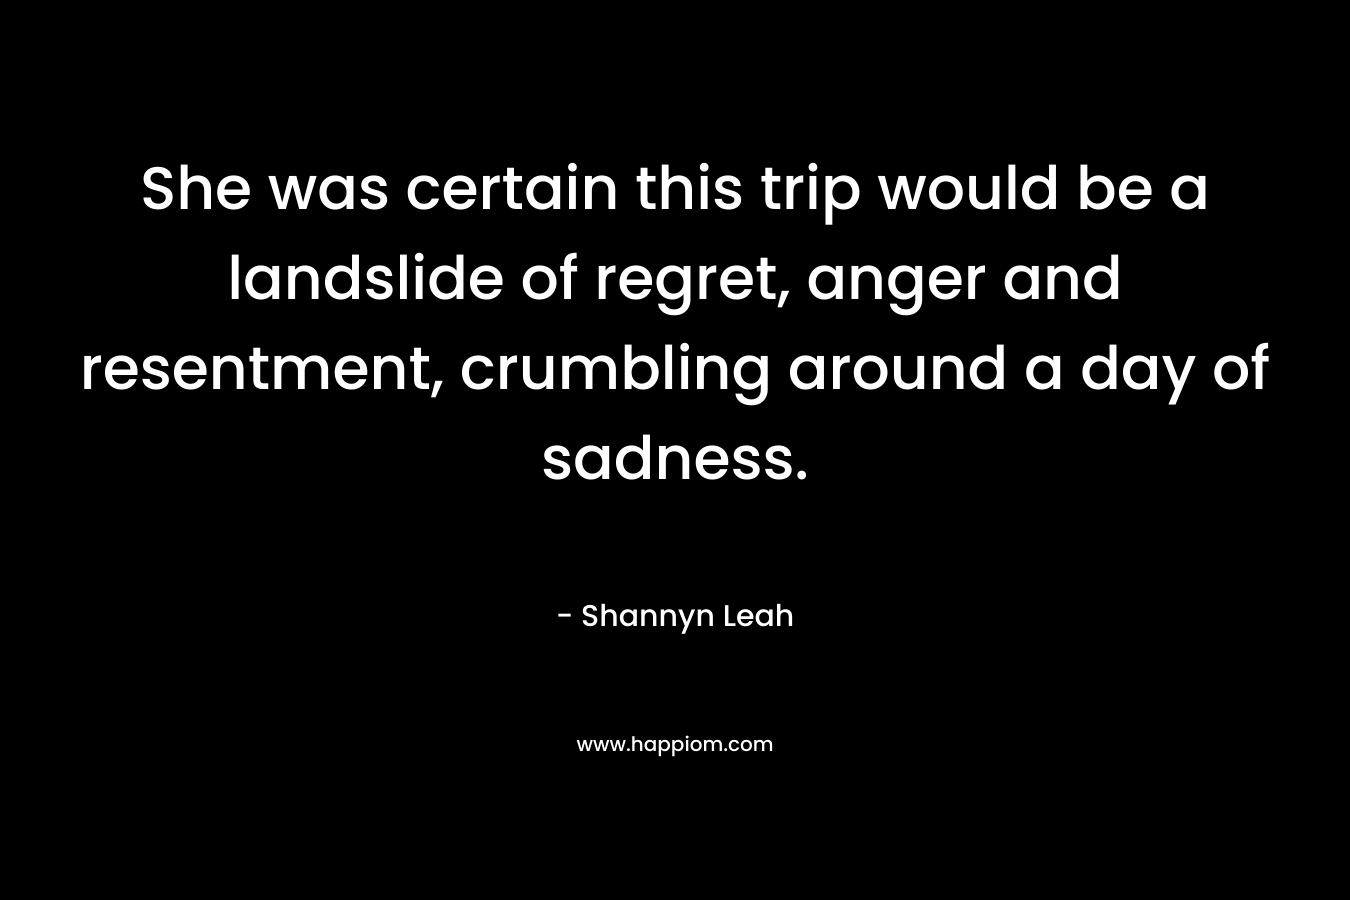 She was certain this trip would be a landslide of regret, anger and resentment, crumbling around a day of sadness. – Shannyn Leah